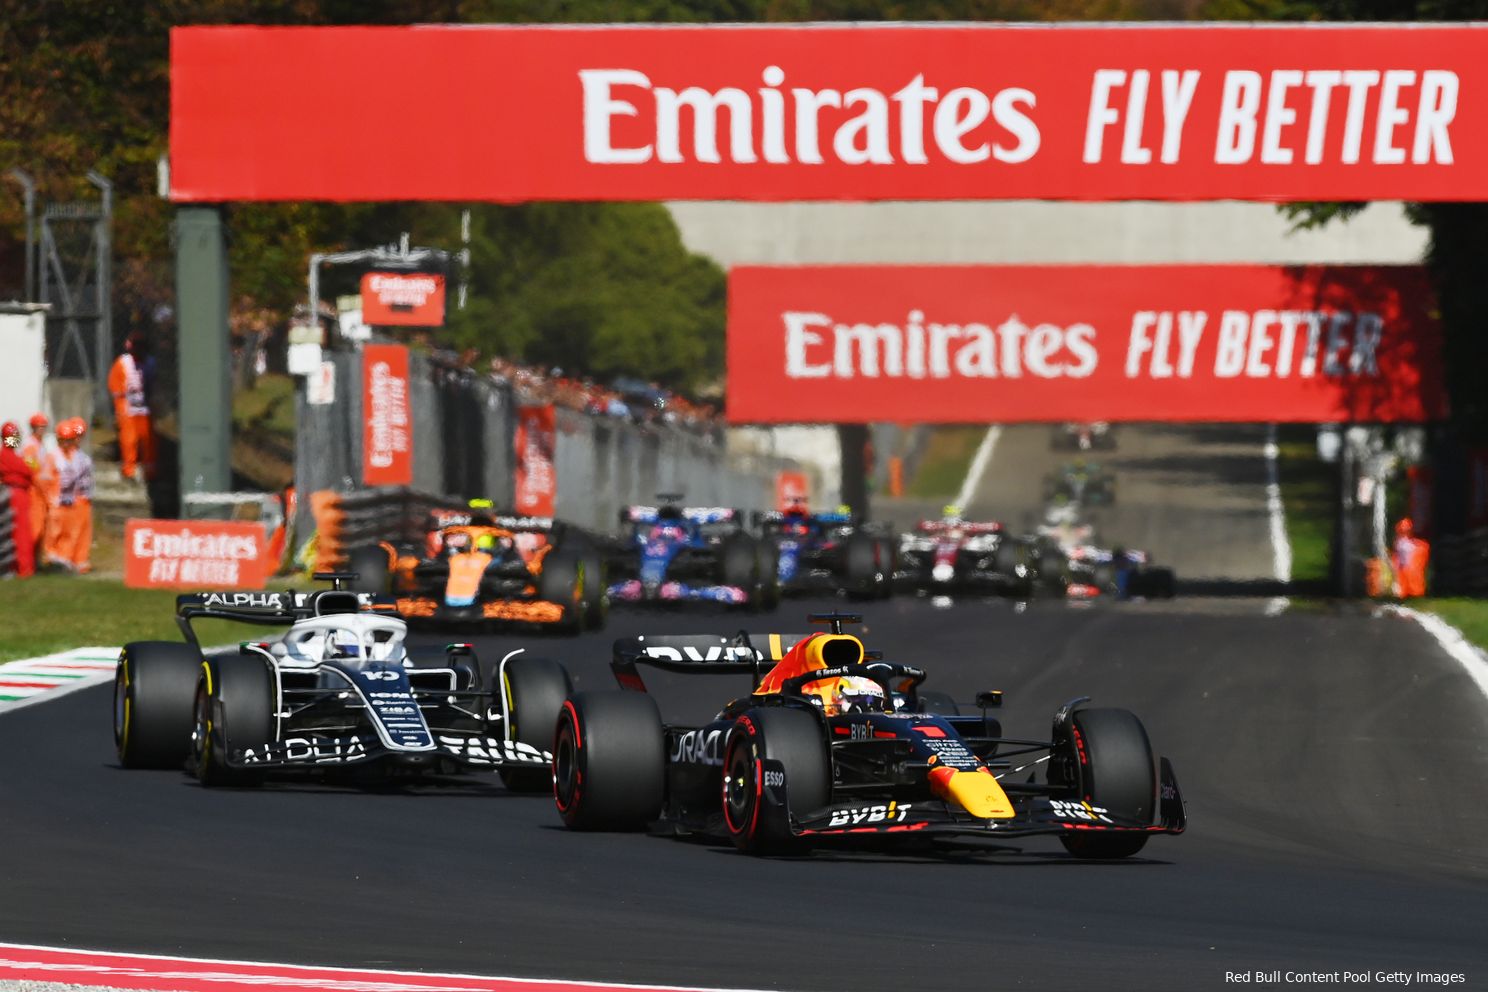 Max Verstappen had to find his way to the front in Monza, but at least he knew where to start.